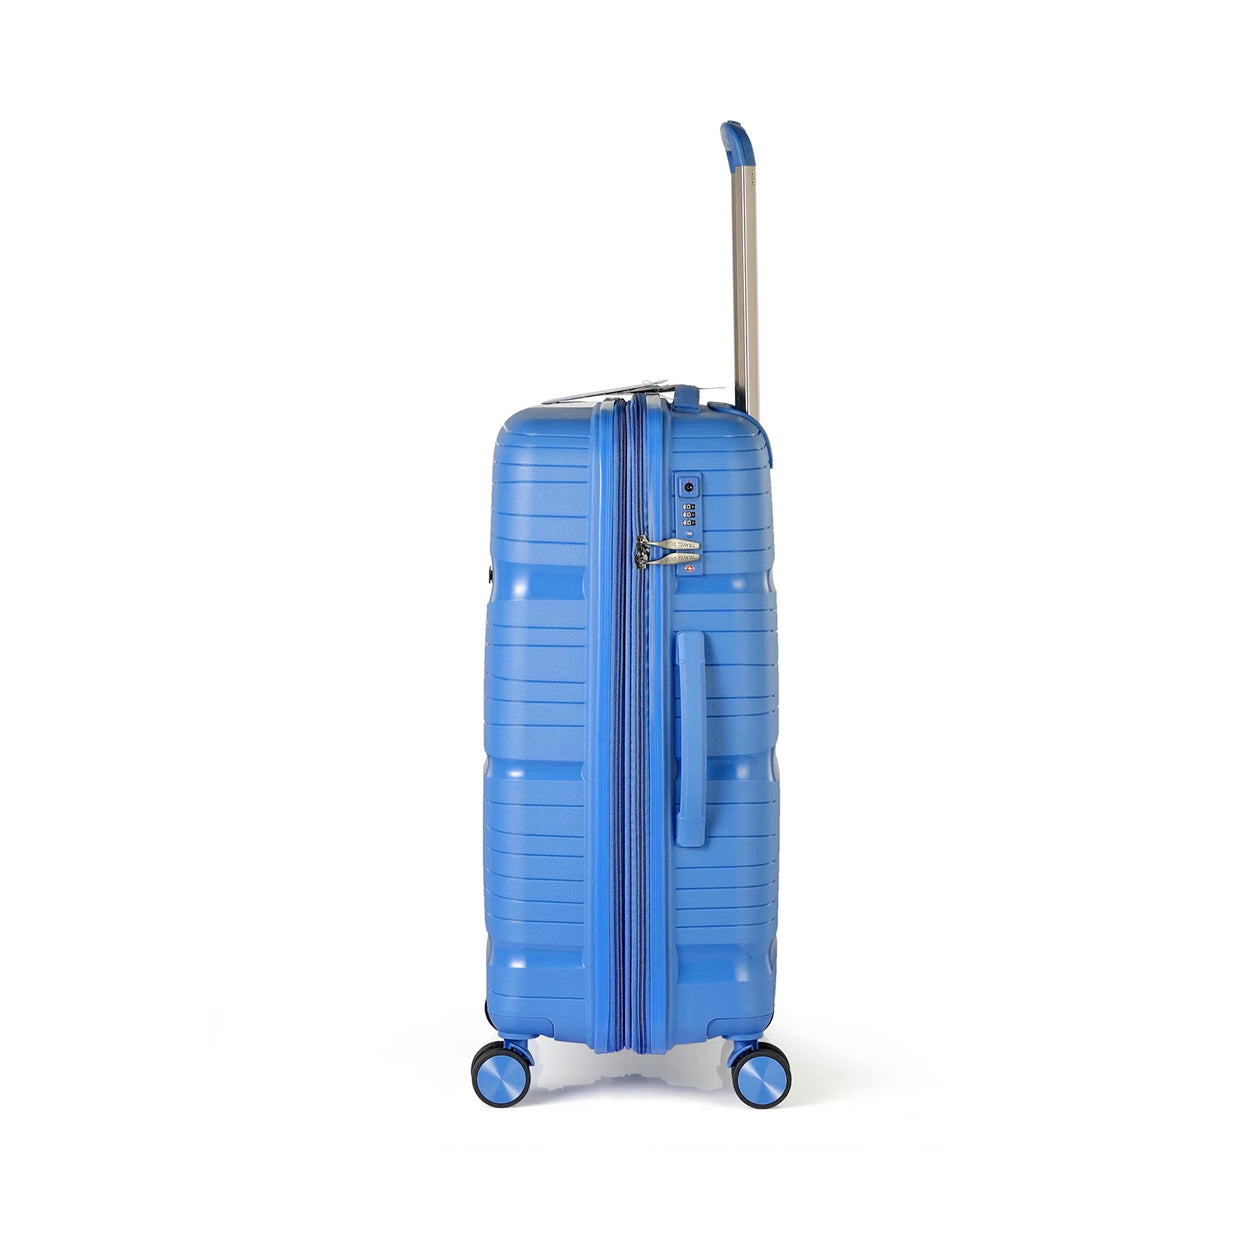 20" Sky Blue Colour Royal PP Luggage Lightweight Hard Case Carry On Trolley Bag with Double Spinner Wheel